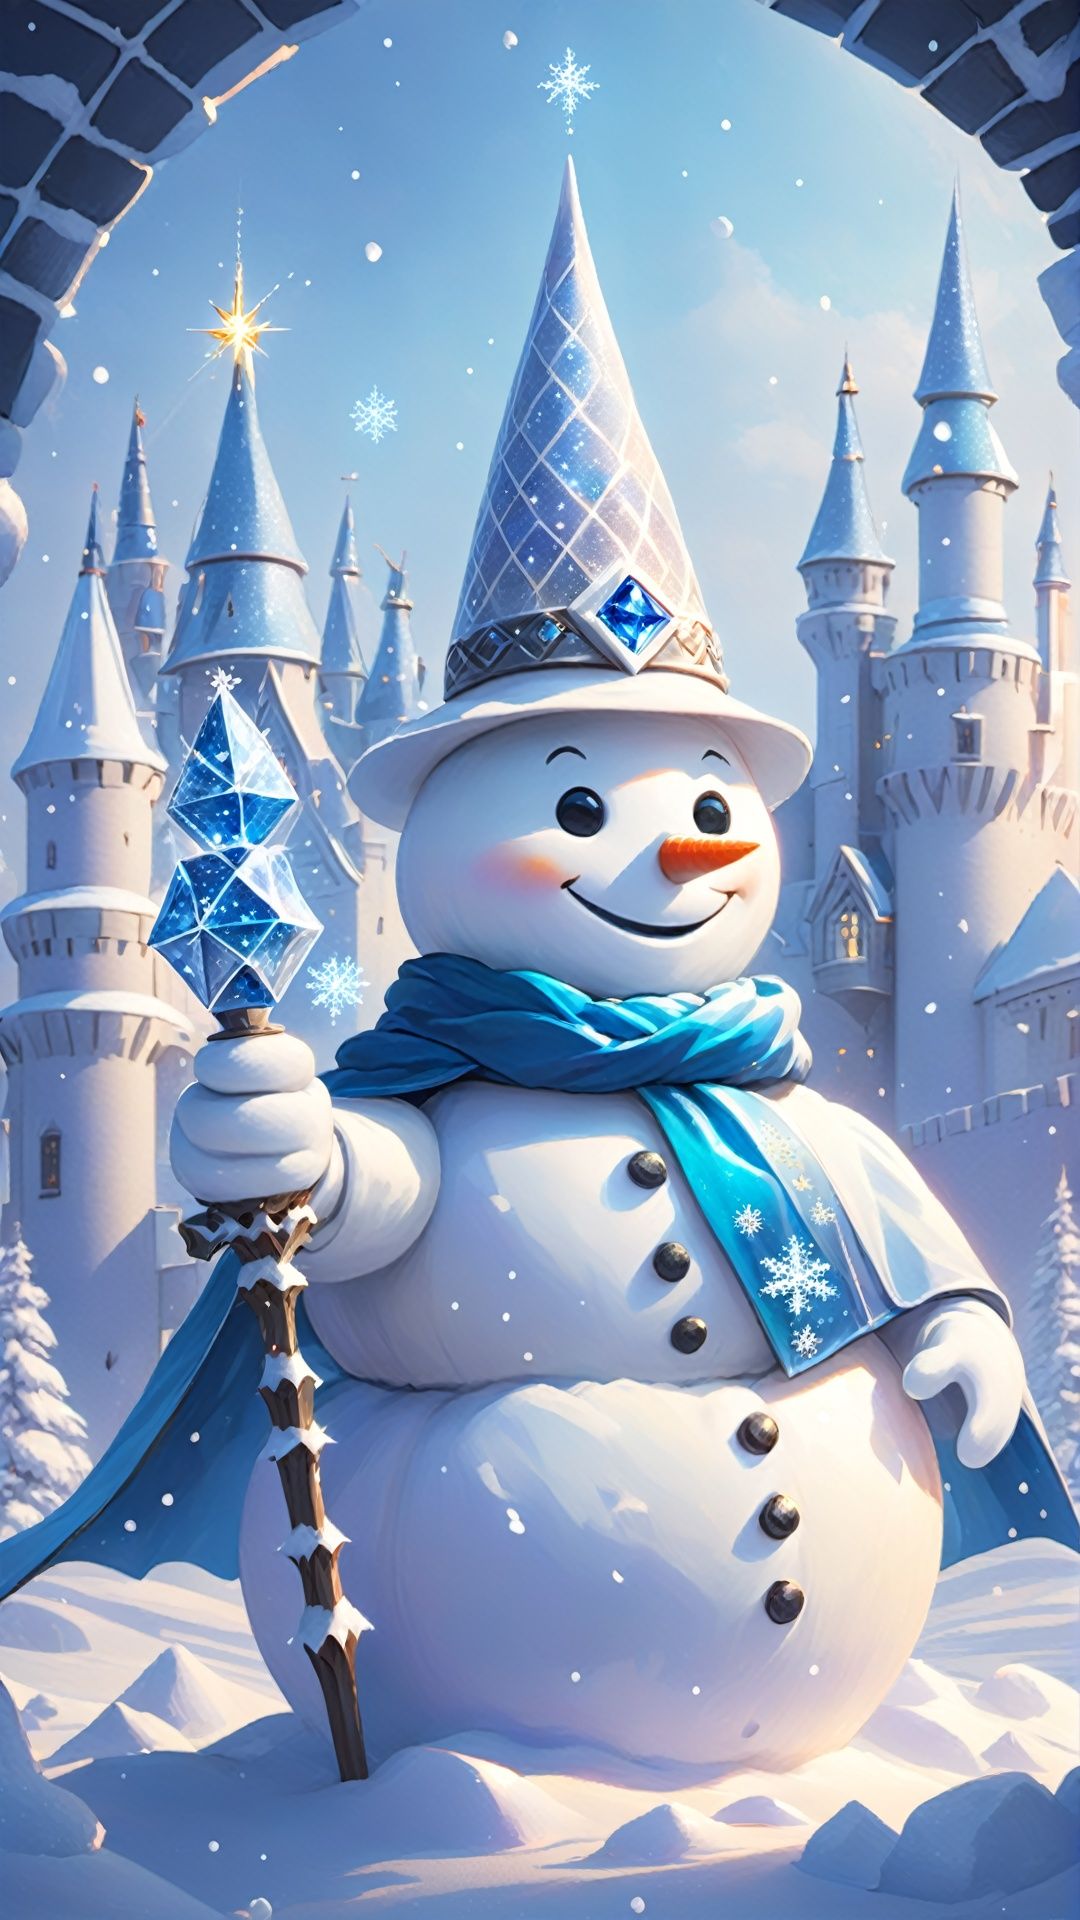 In the square of Snowman Castle, a special snowman stands in the center. This snowman wears a silver-white cloak dotted with sparkling ice crystals, like a prince of snow elves. His eyes were two bright sapphires that radiated wisdom. The Snowman Prince holds a snow crystal scepter. With a wave of his hand, the snowflakes weave into gorgeous patterns in the air, adding a mysterious sense of ritual to the Snowman Castle. Under his leadership, the snowmen celebrated this wonderful snowy night together